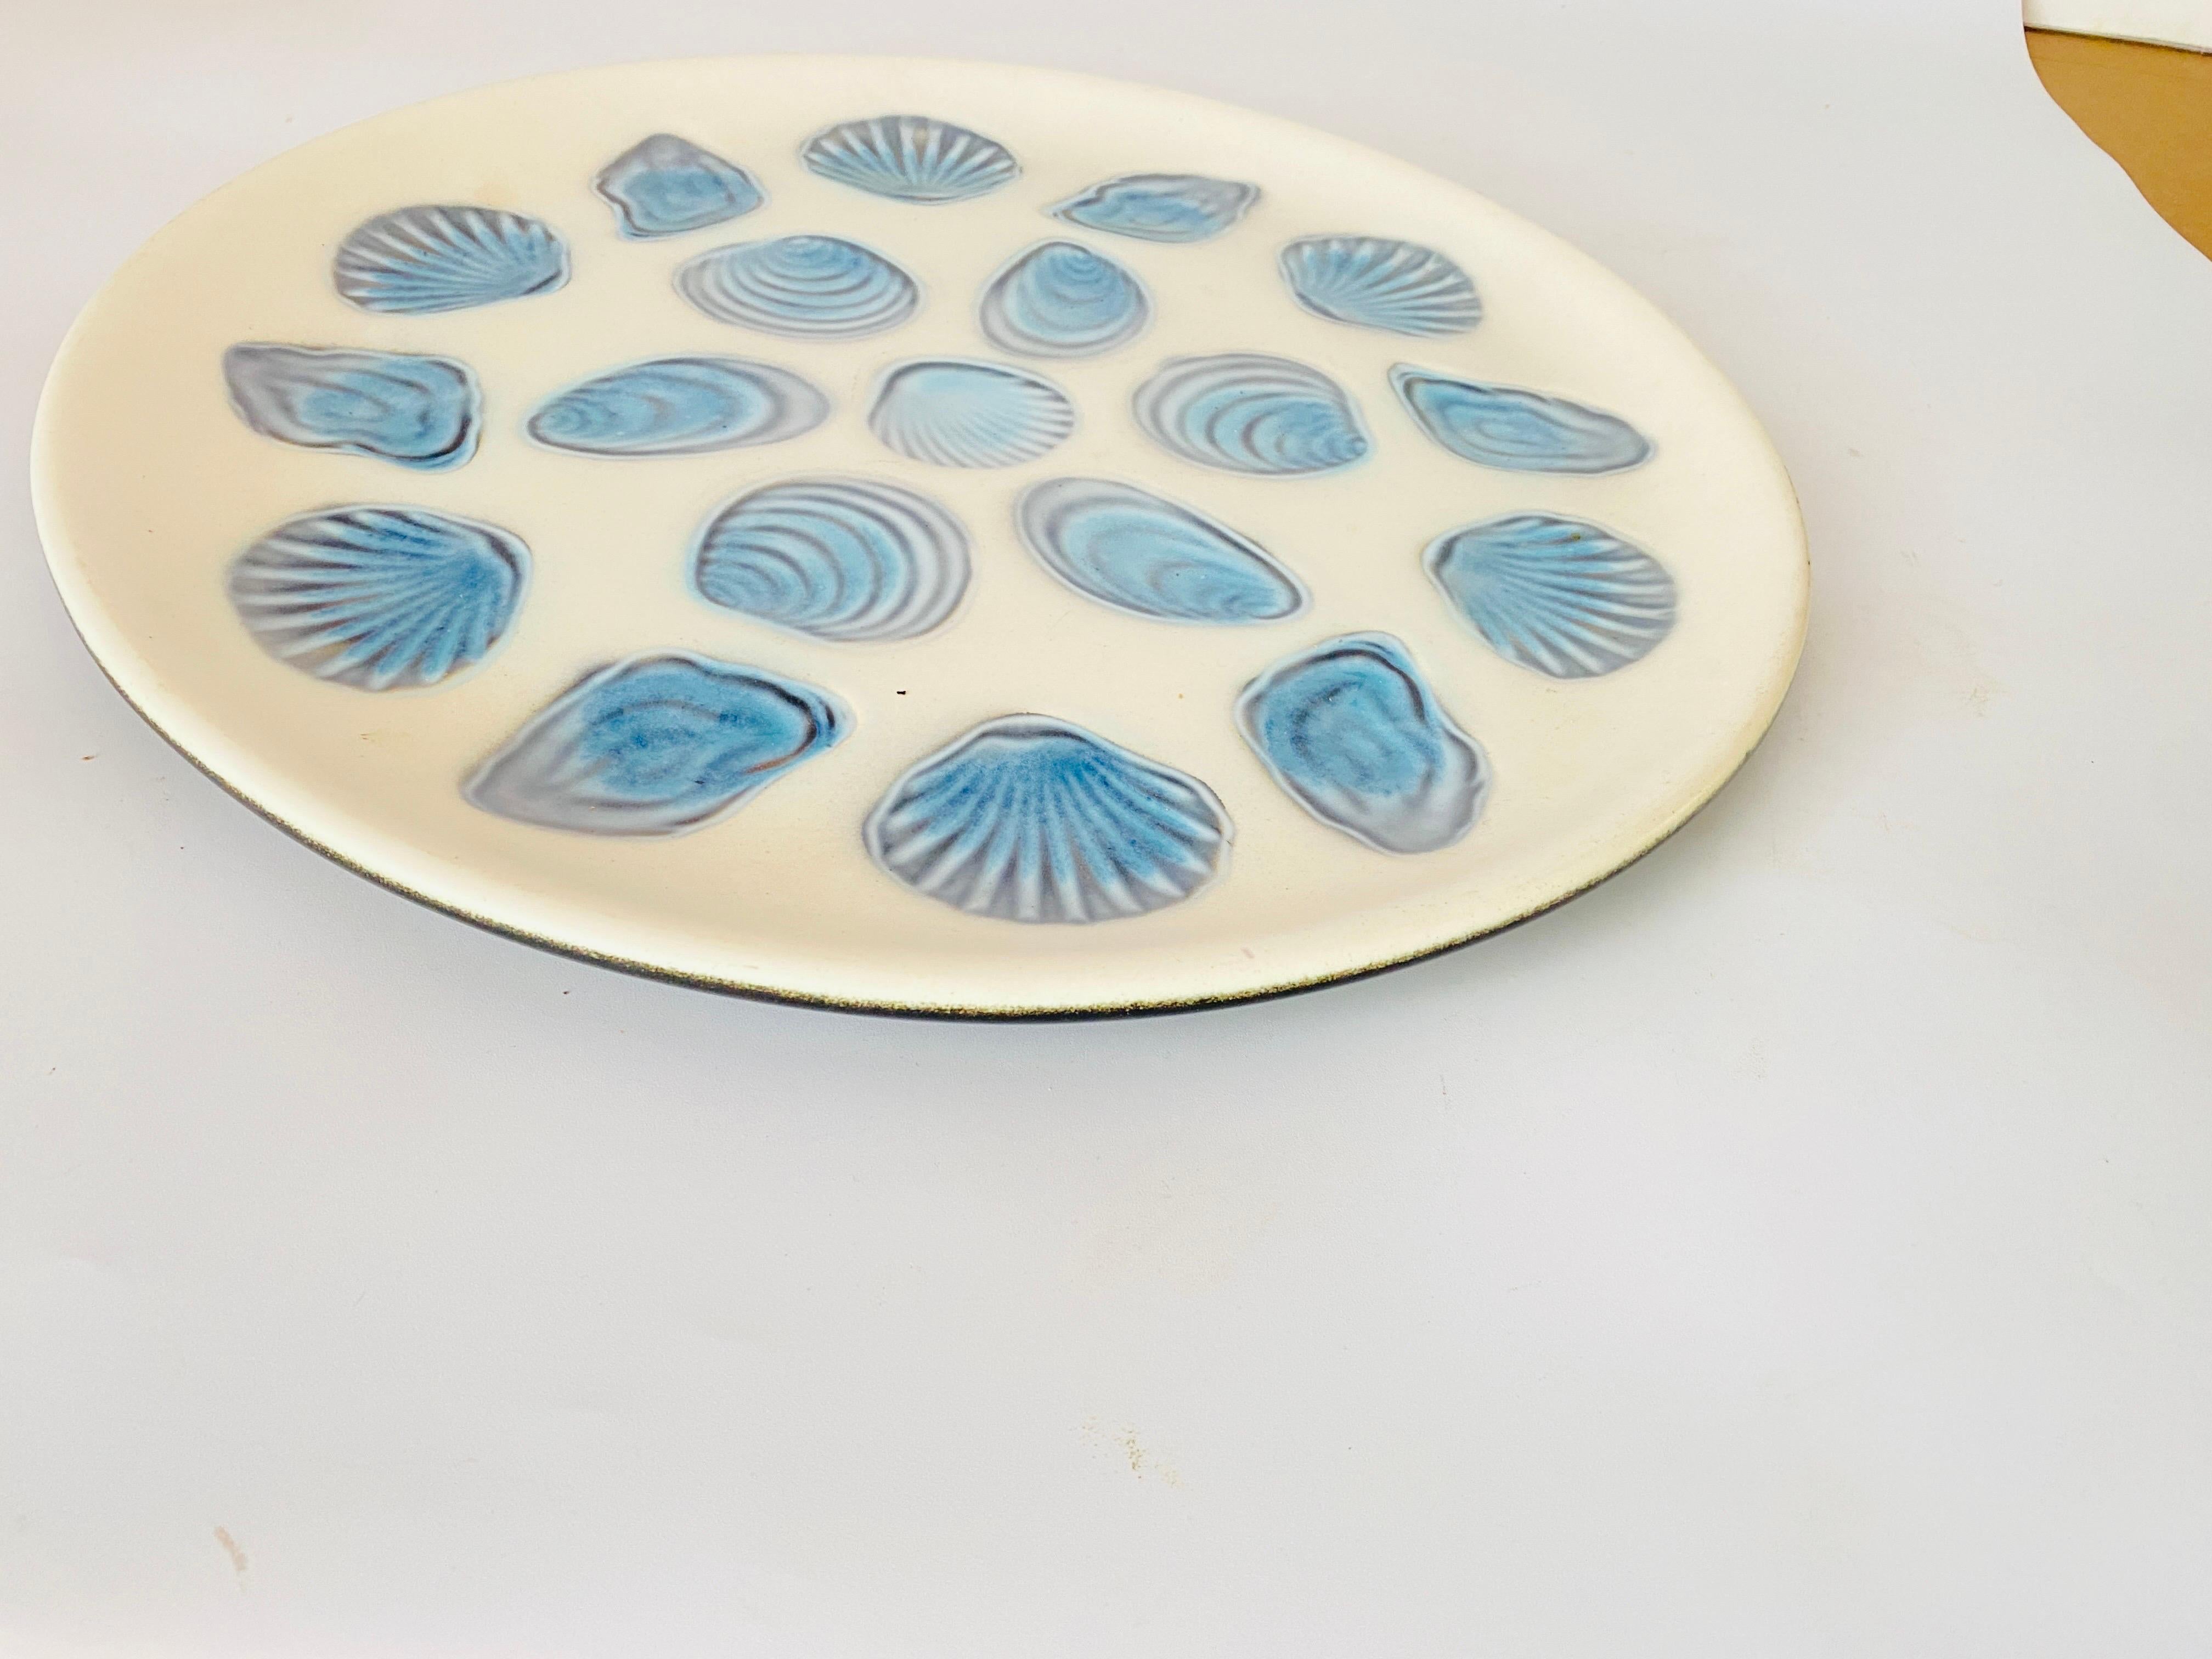 Large Oyster Plate in Ceramic Blue and White Color, 1960 France by Elchinger For Sale 2